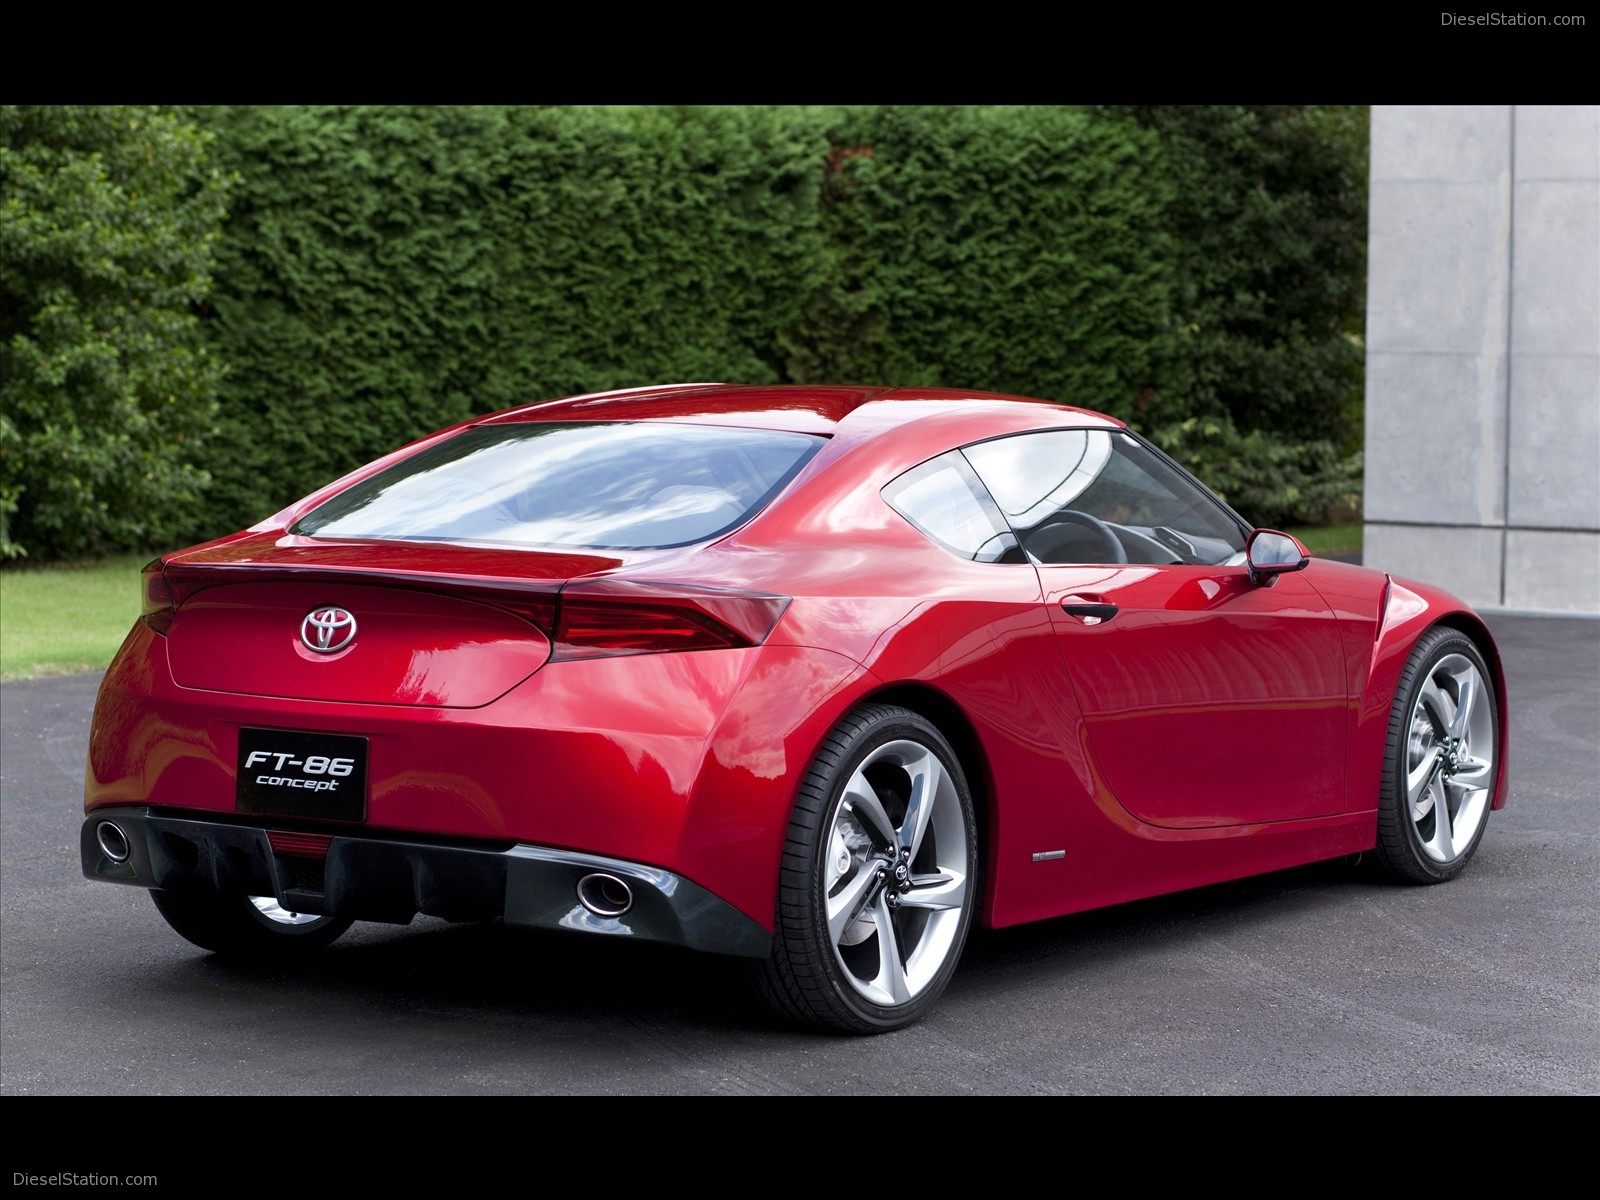 Toyota FT 86 Concept Exotic Car Wallpaper 03 of 12